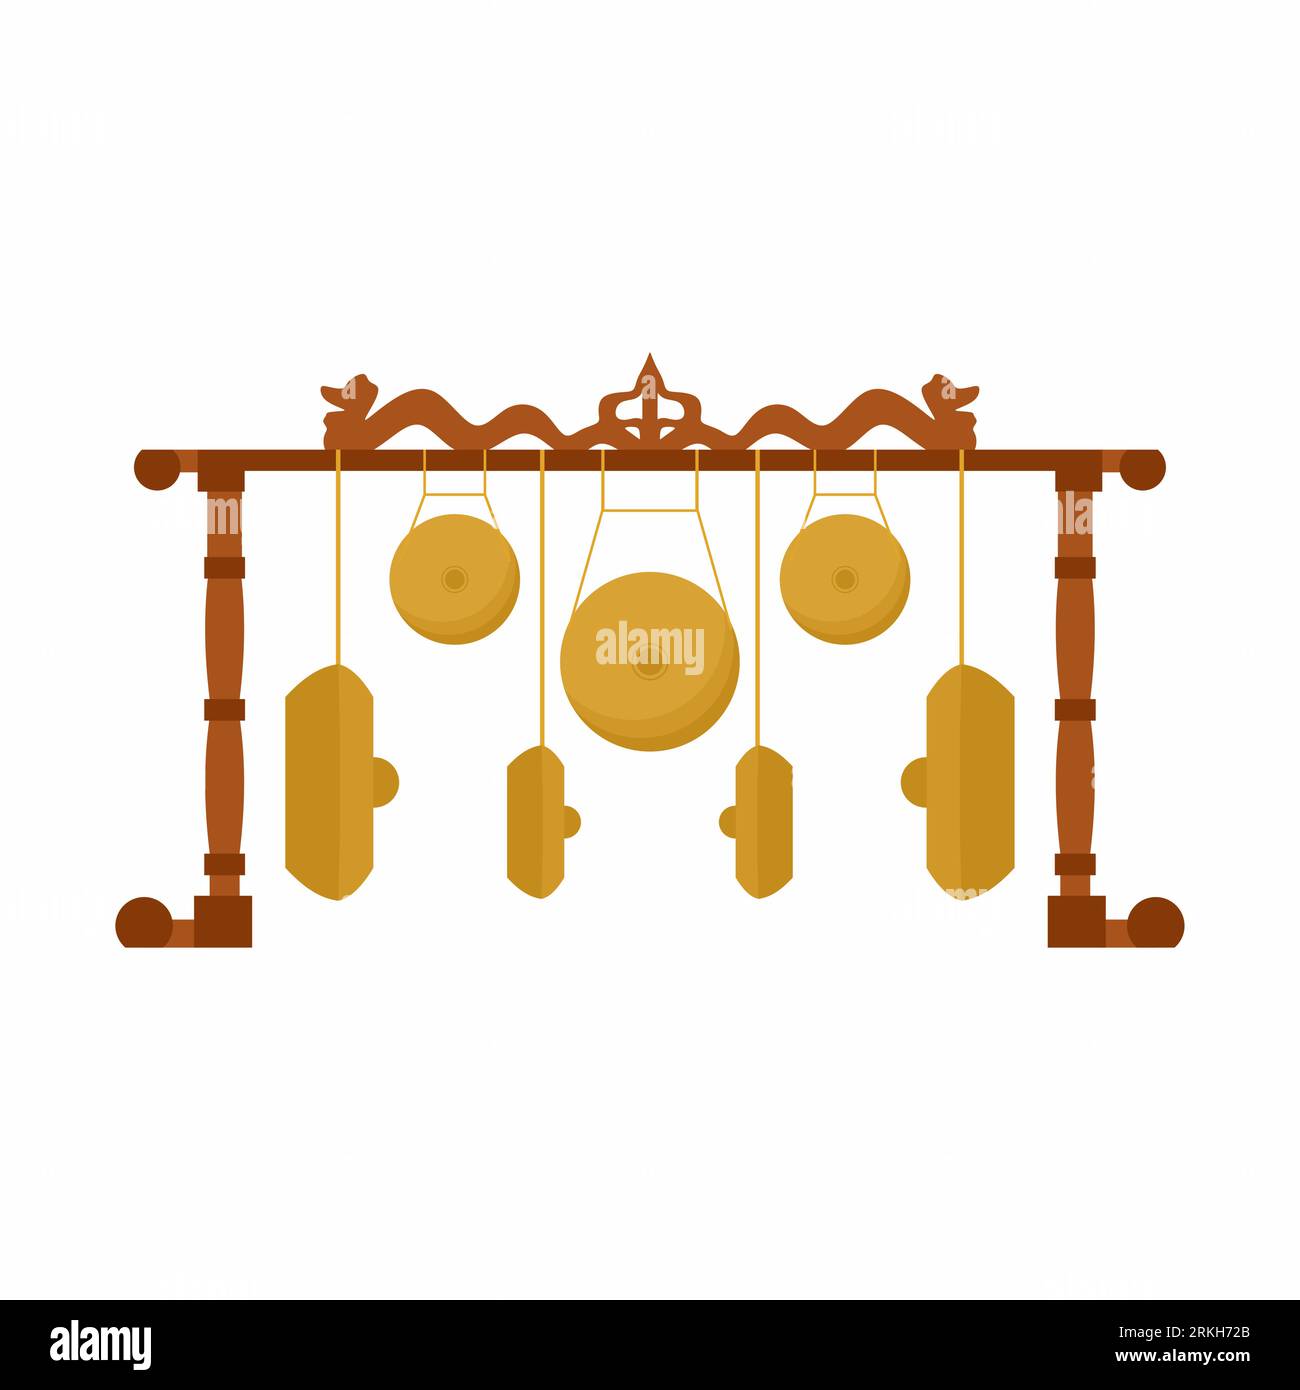 Vector icon of Kempul, a traditional javanese instrument. This is is a type of hanging gong used in Indonesian gamelan. Traditional percussion instrum Stock Vector